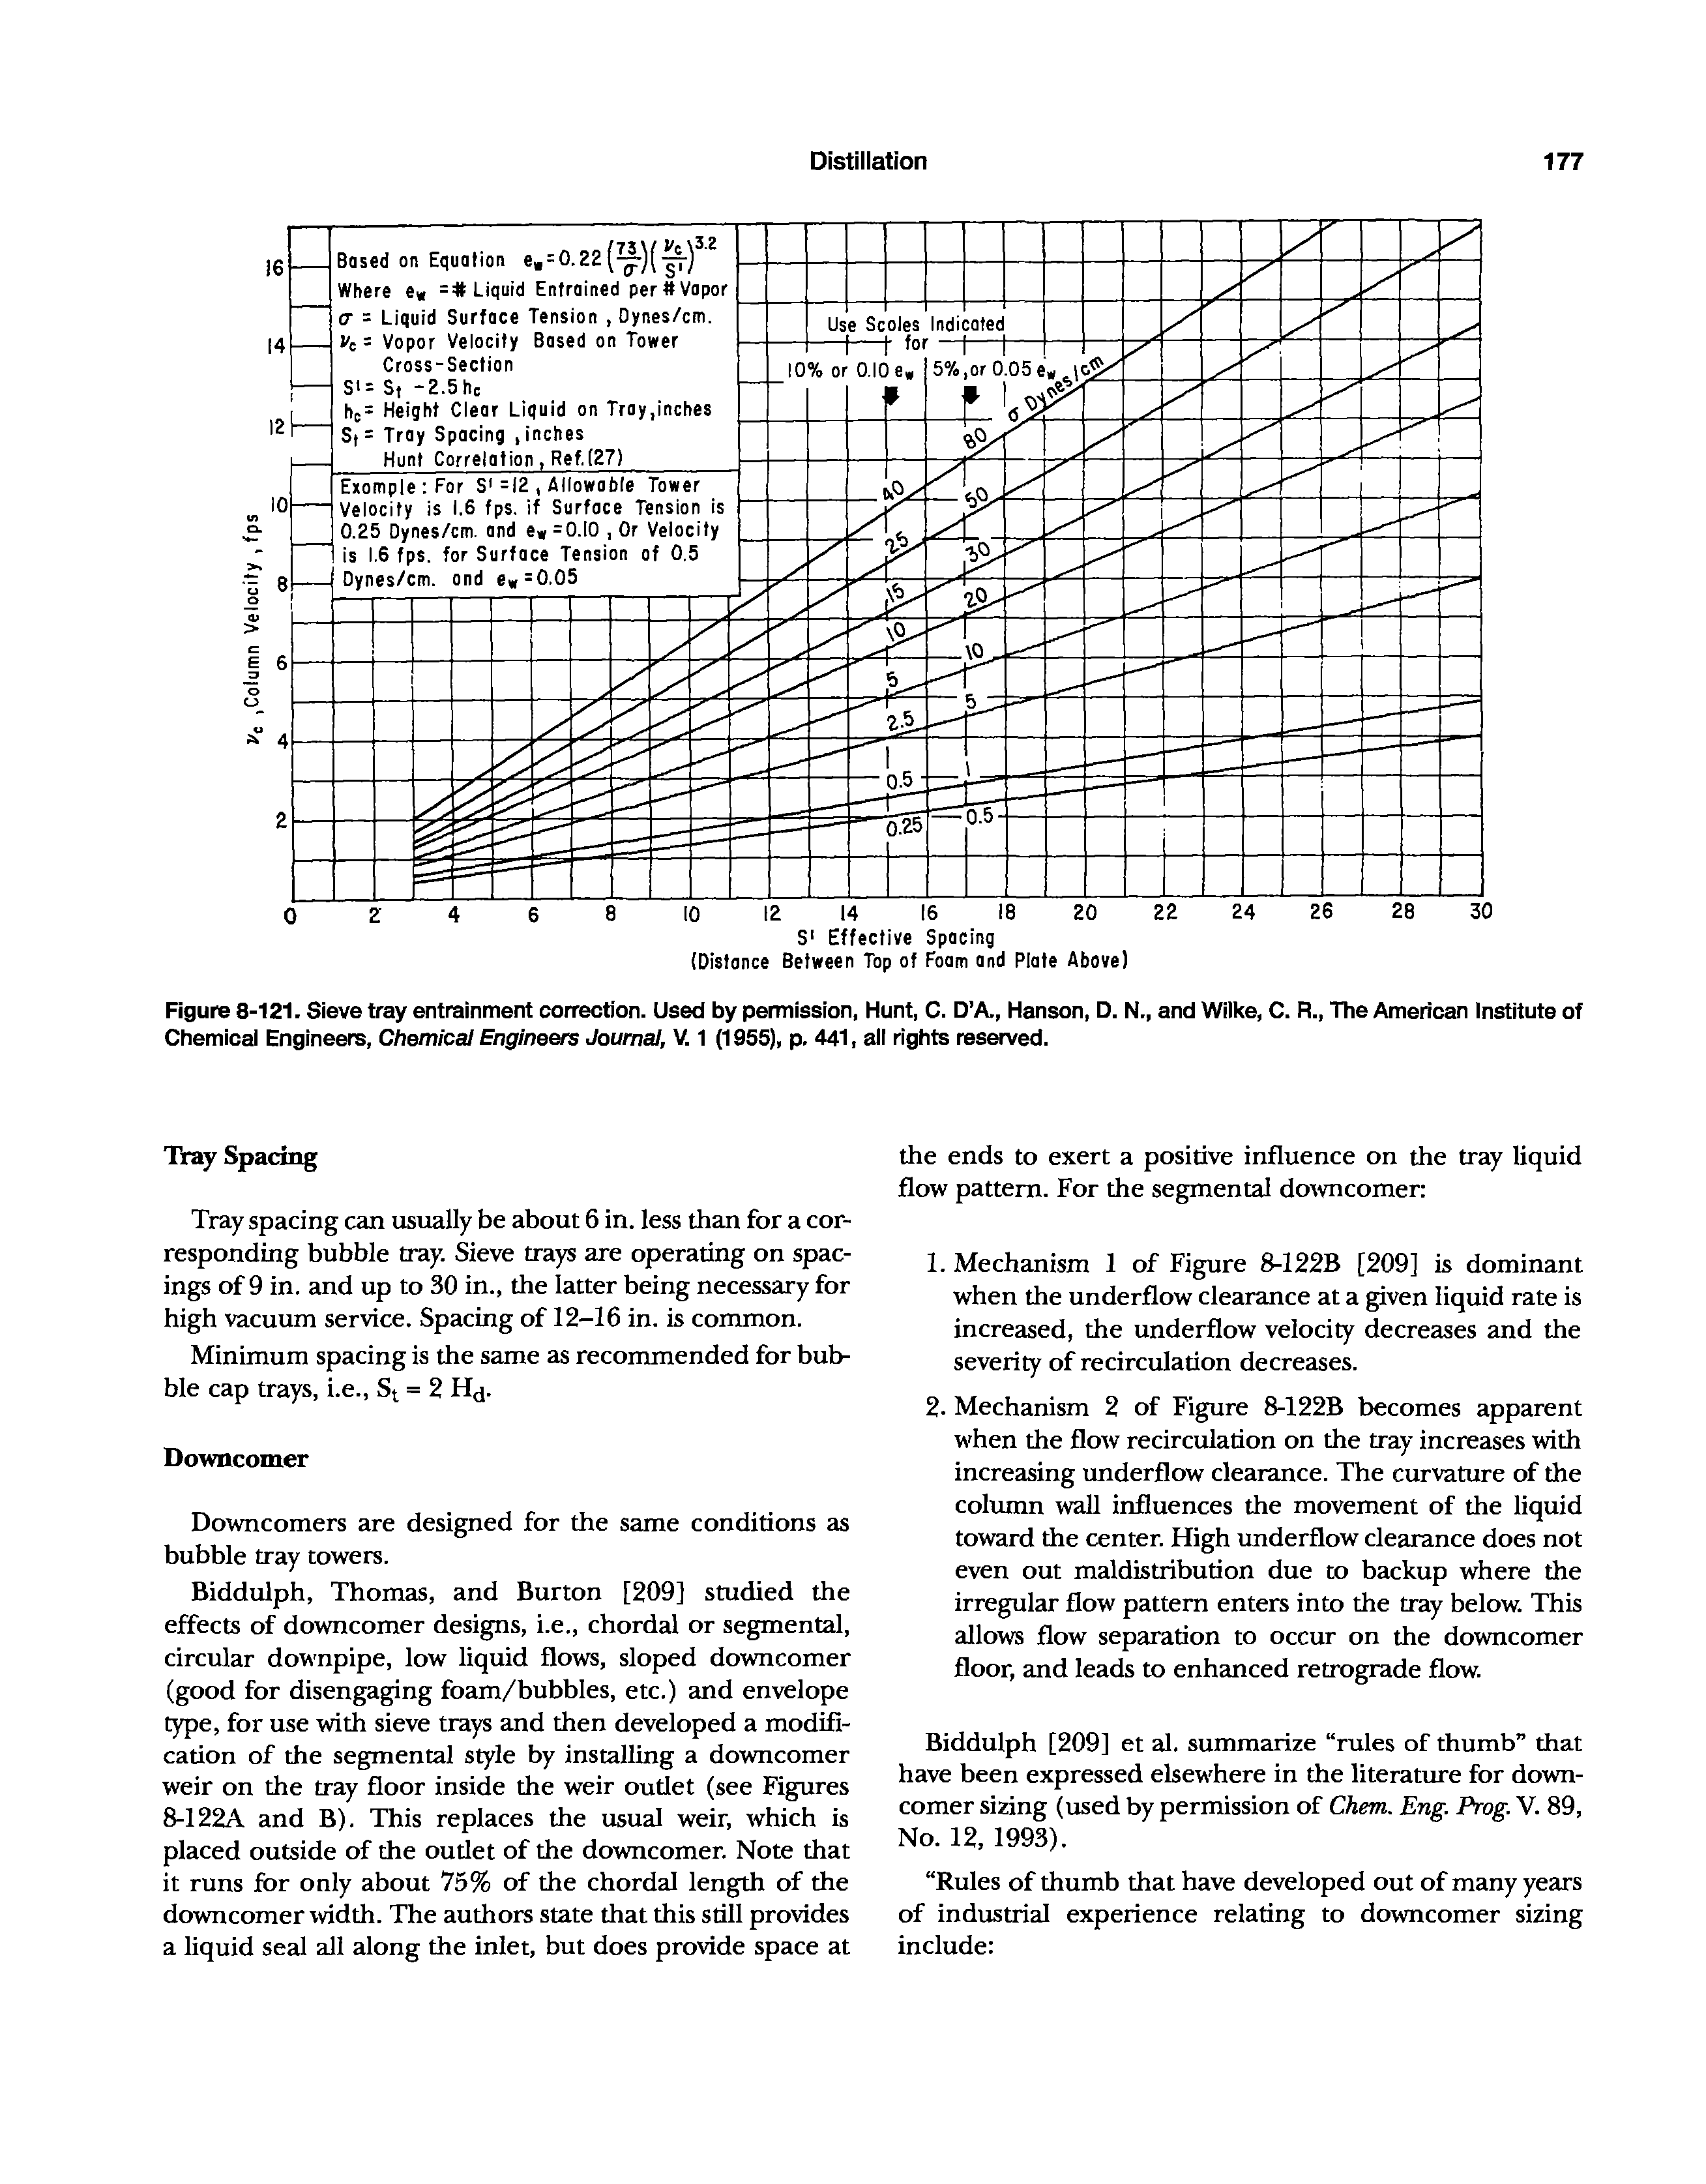 Figure 8-121. Sieve tray entrainment correction. Used by permission, Hunt, C. D A., Hanson, D. N., and Wilke, C. R., The American Institute of Chemical Engineers, Chemical Engineers Journal, V. 1 (1955), p. 441, all rights reserved.